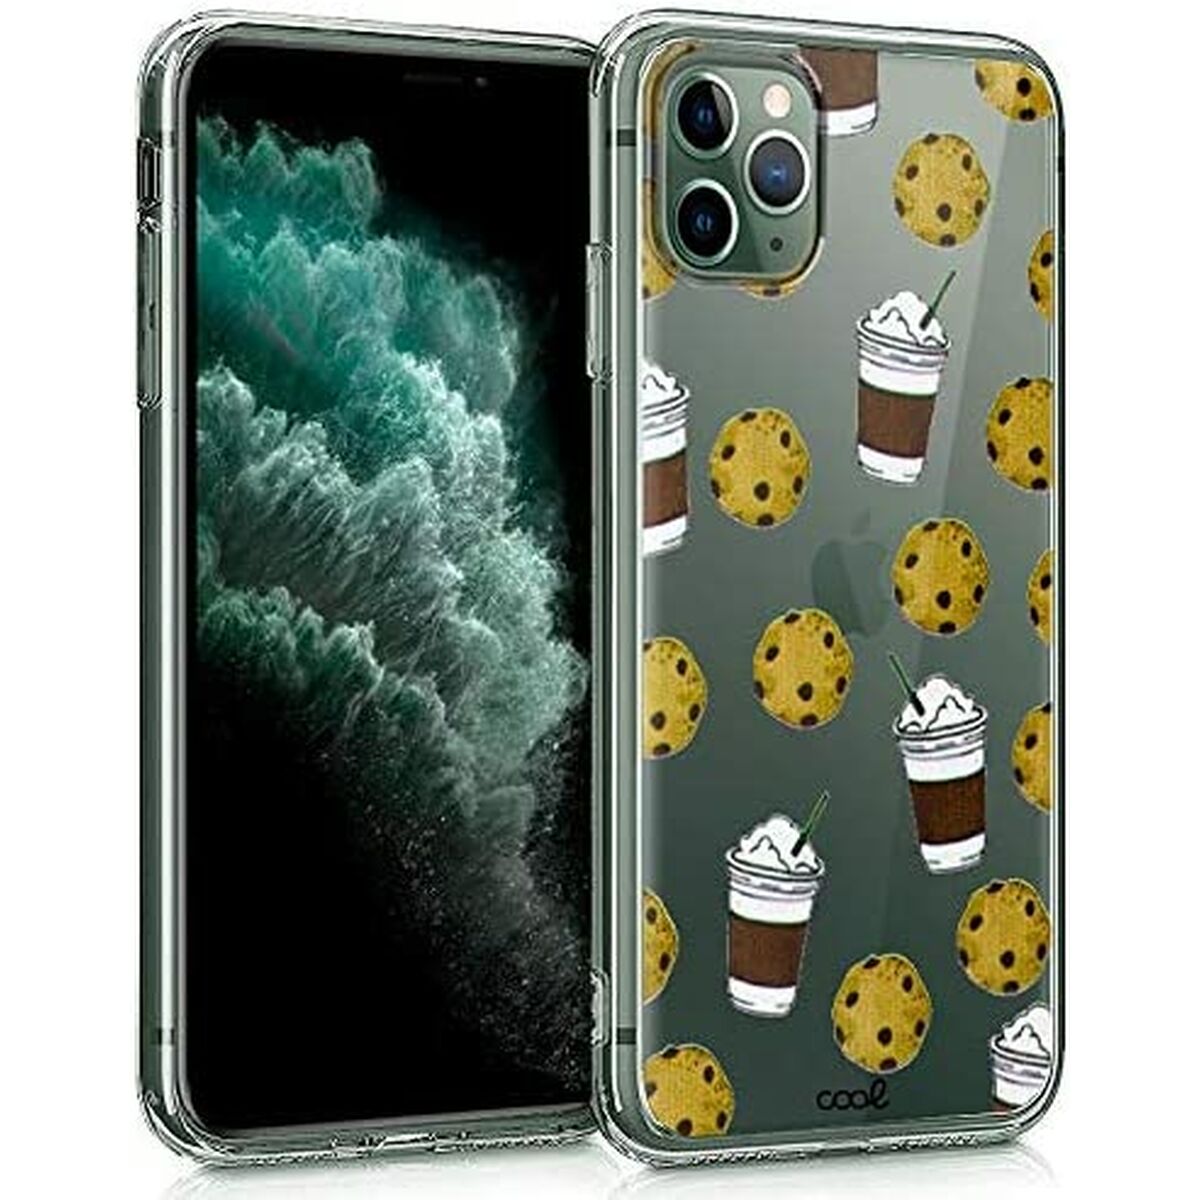 Mobile cover Cool Cookies iPhone 11 Pro Max Multicolour